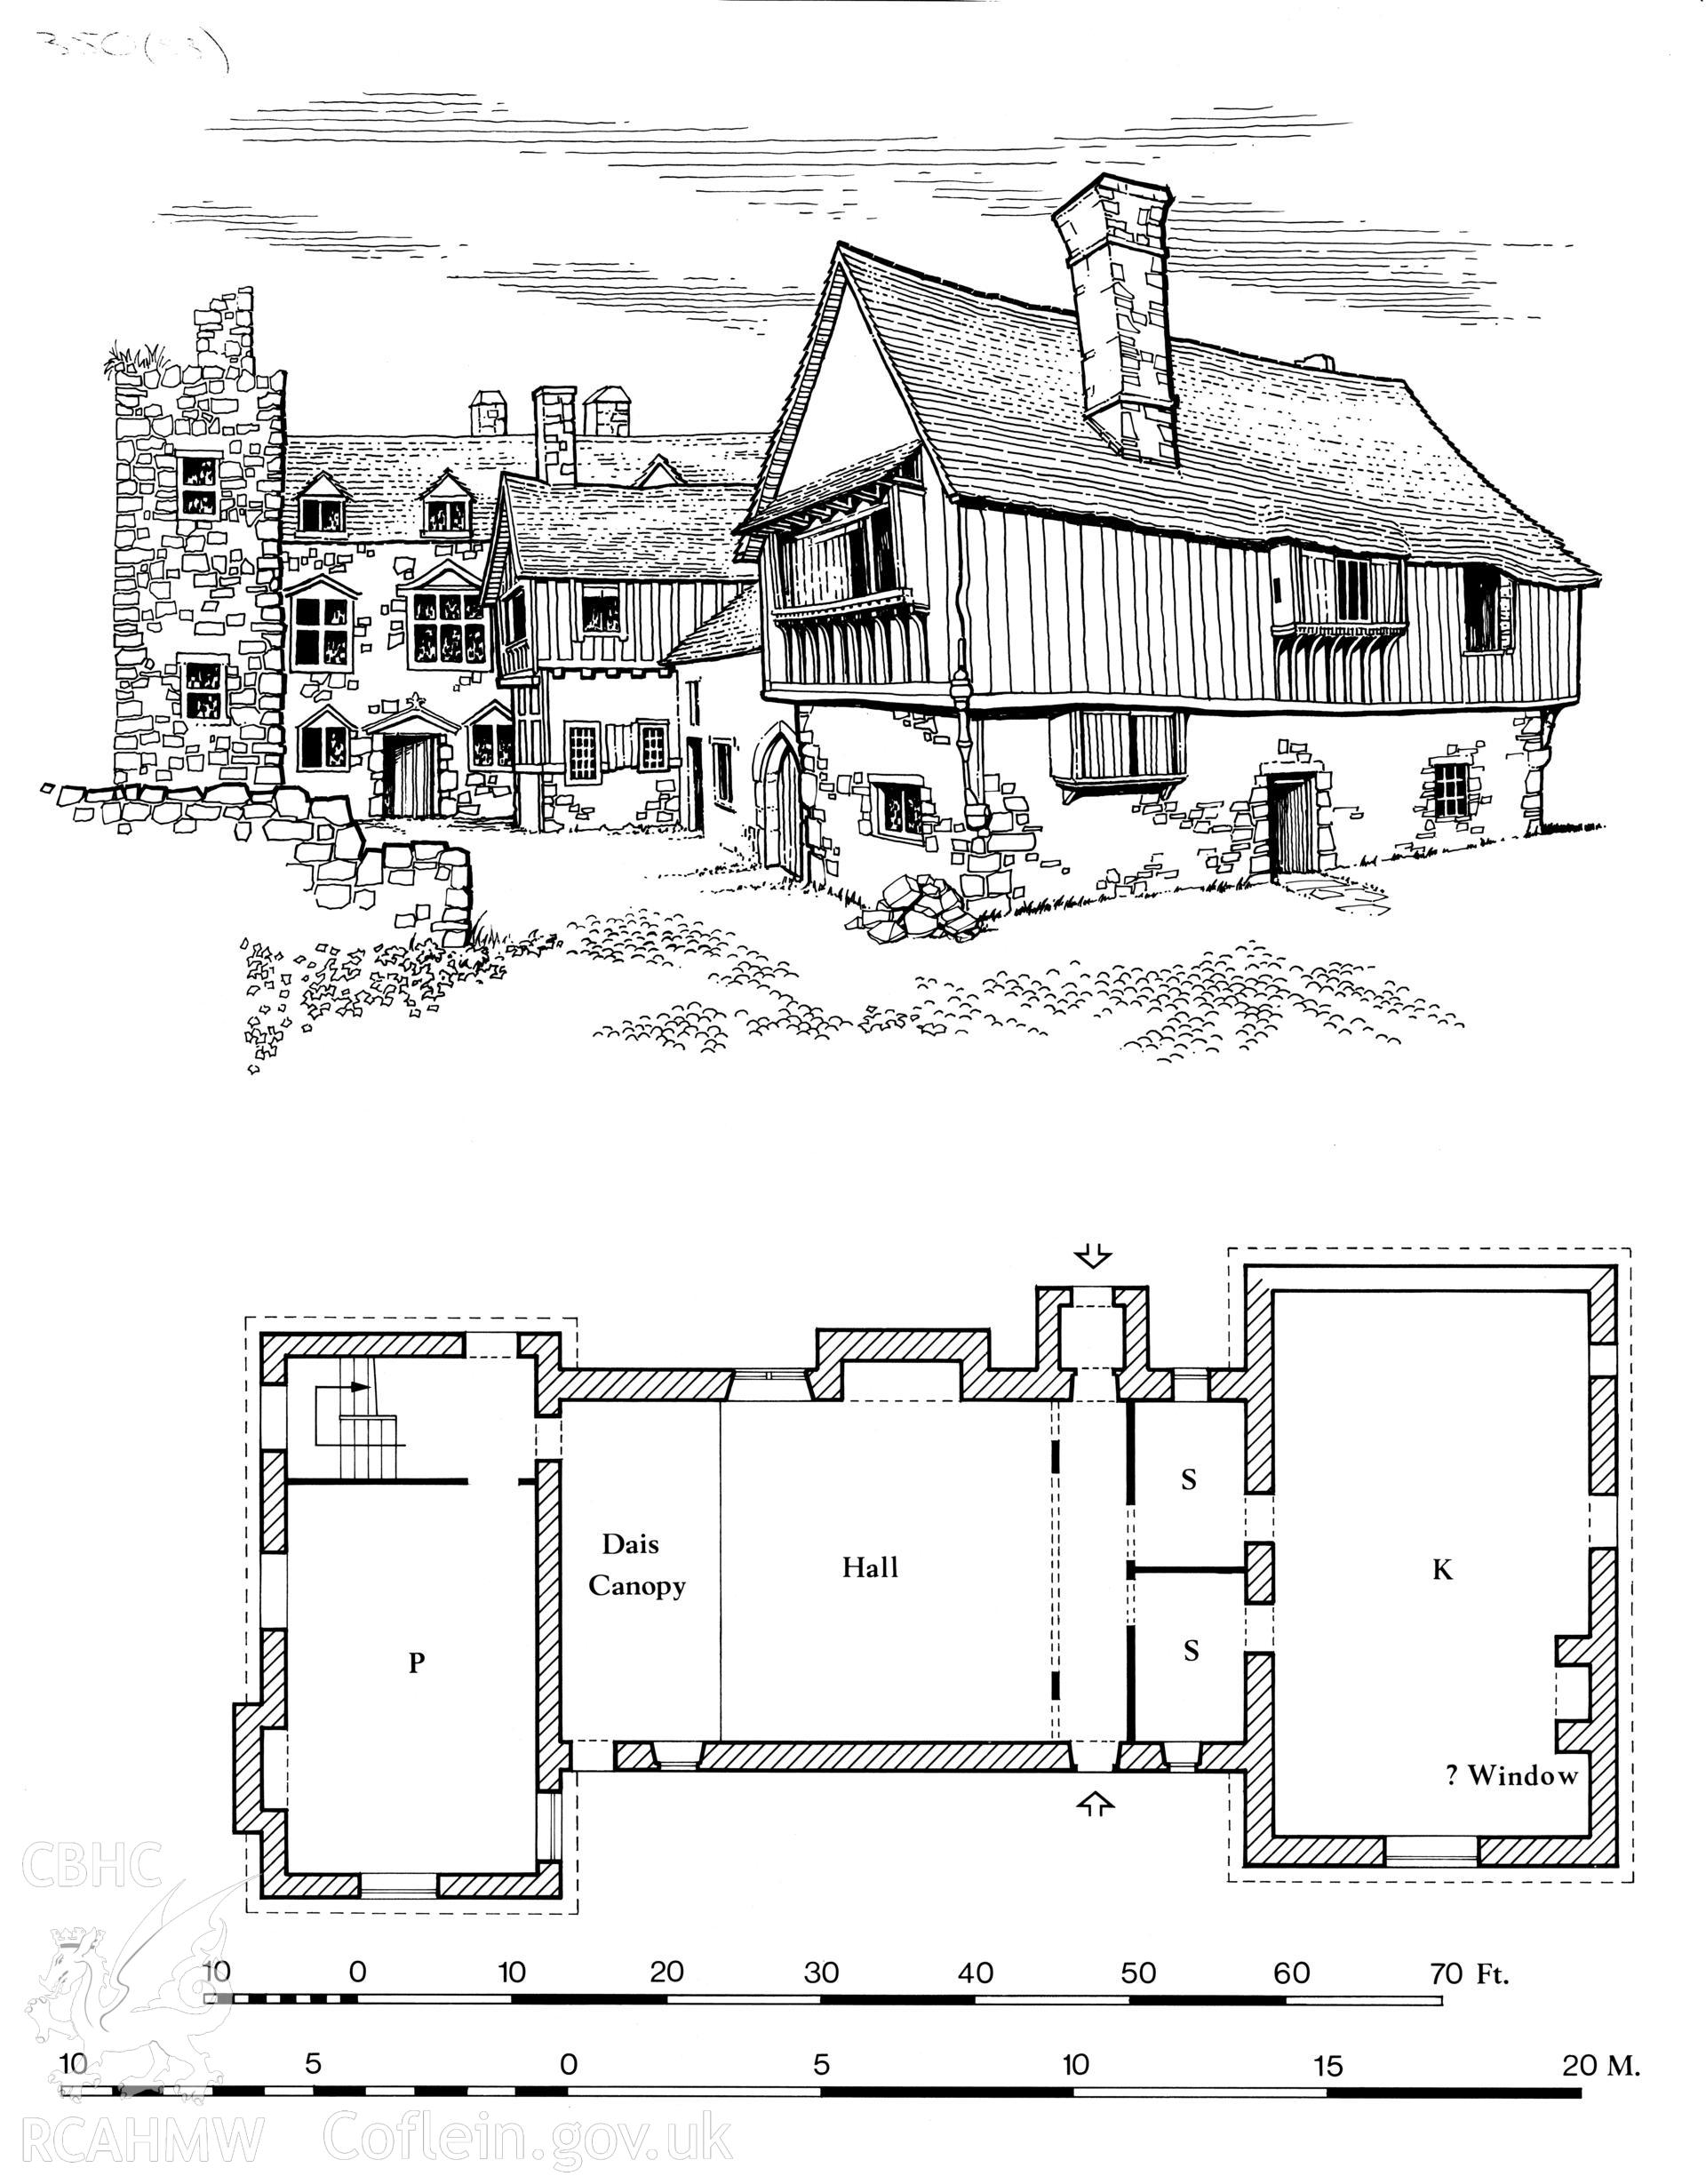 RCAHMW drawing (ink on linen) showing plan & elevation of Henblas, Beaumaris.  Published in Houses of the Welsh Countryside, fig 60.